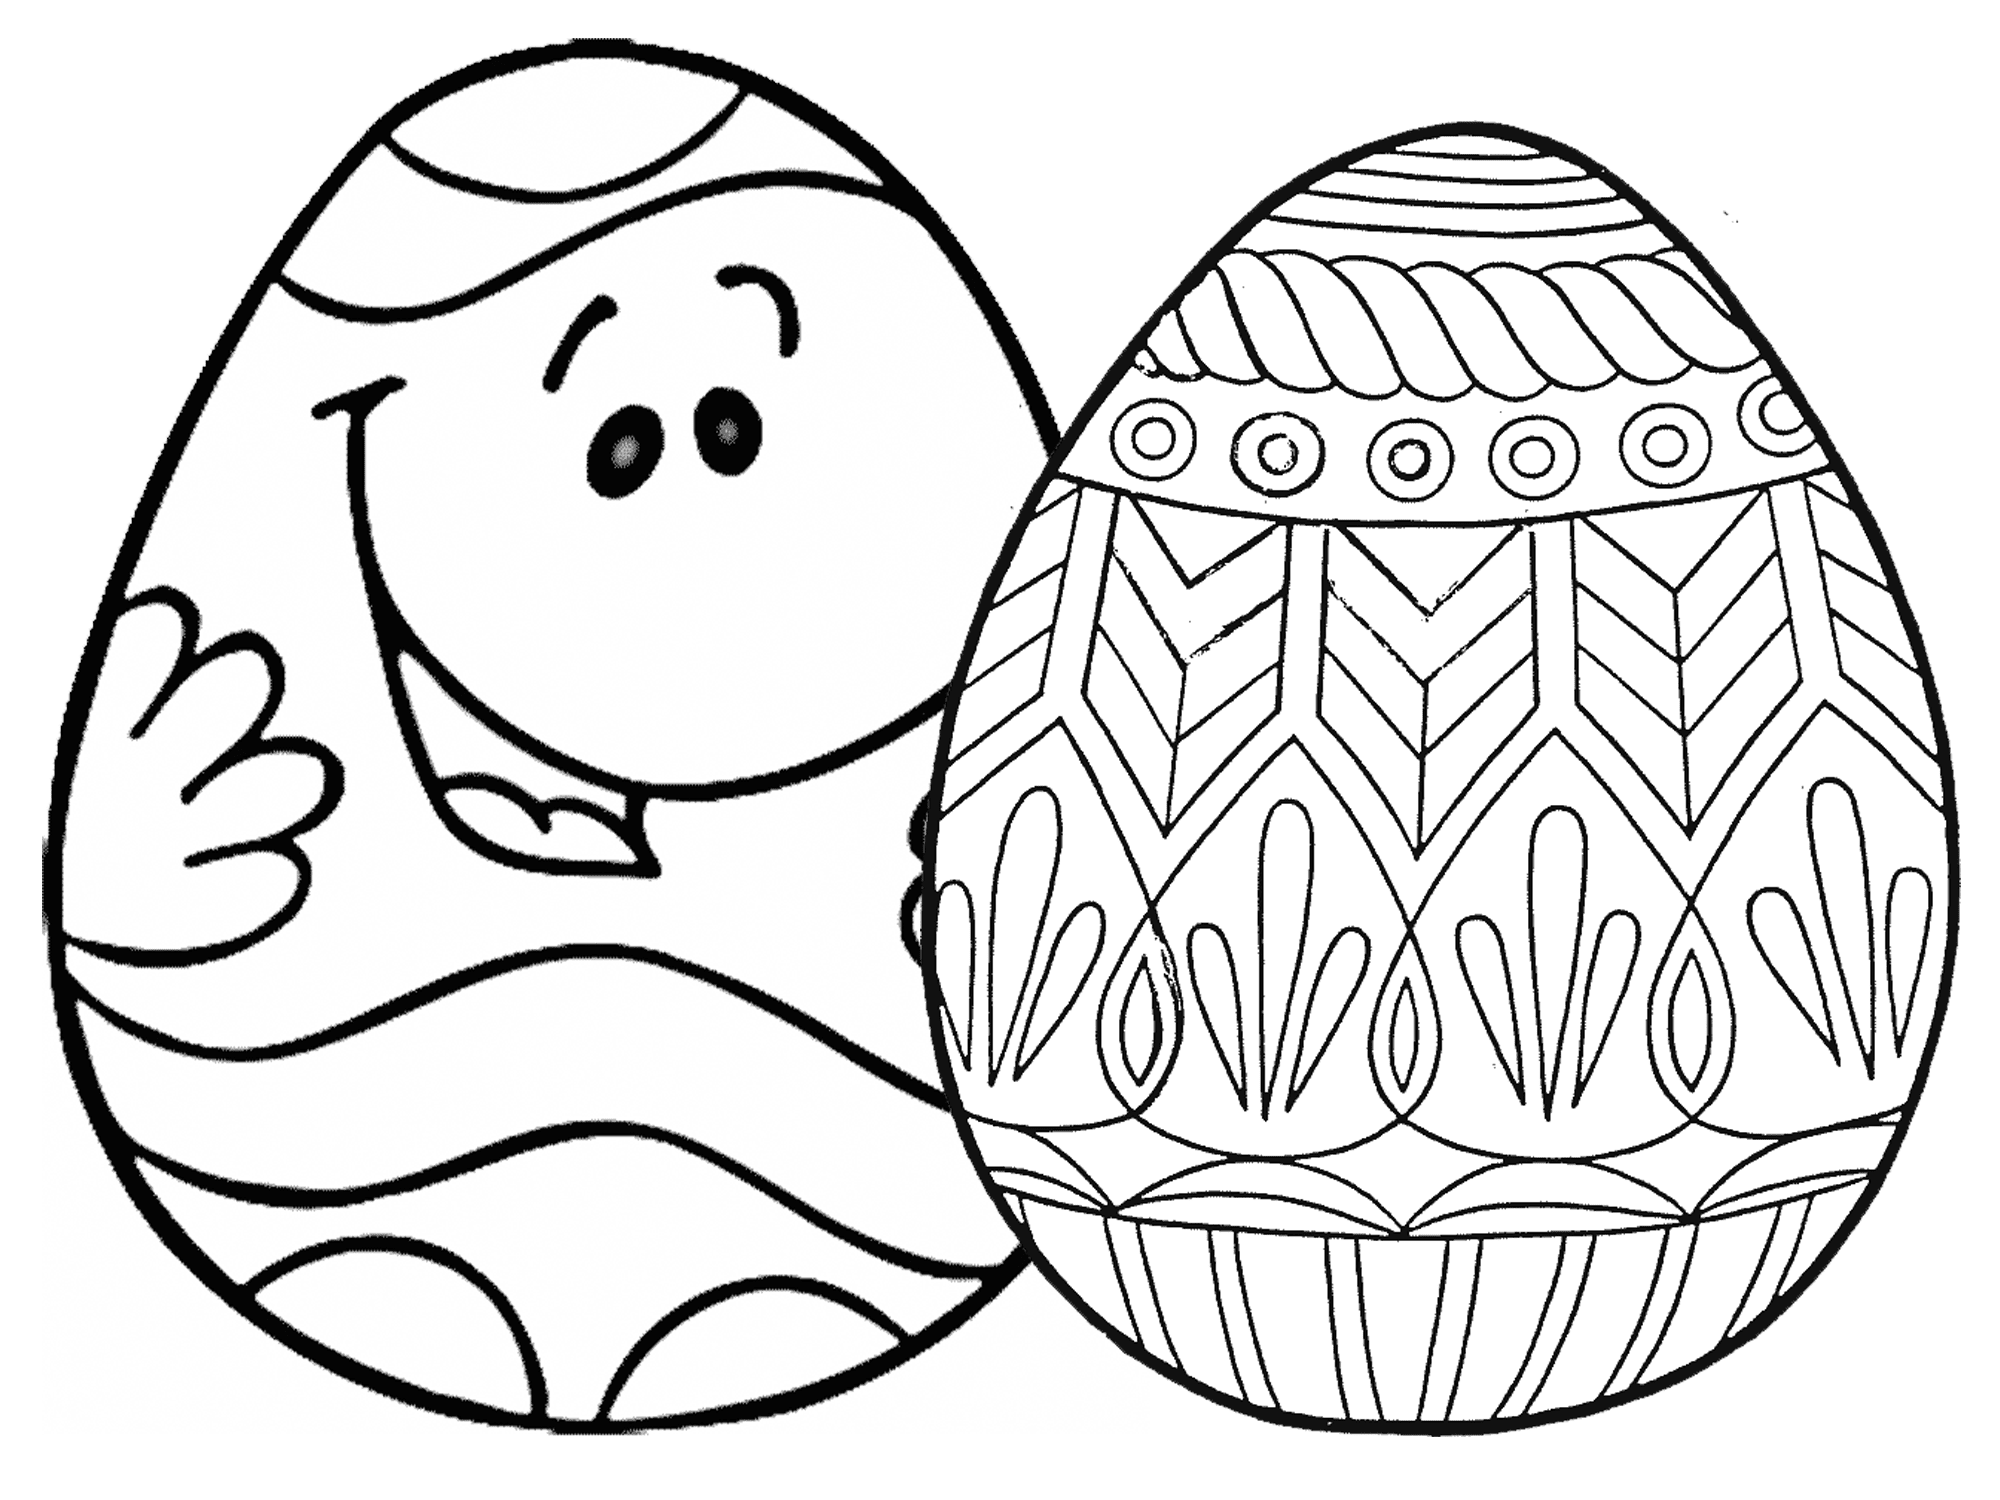 Printable Easter Egg Coloring Pages